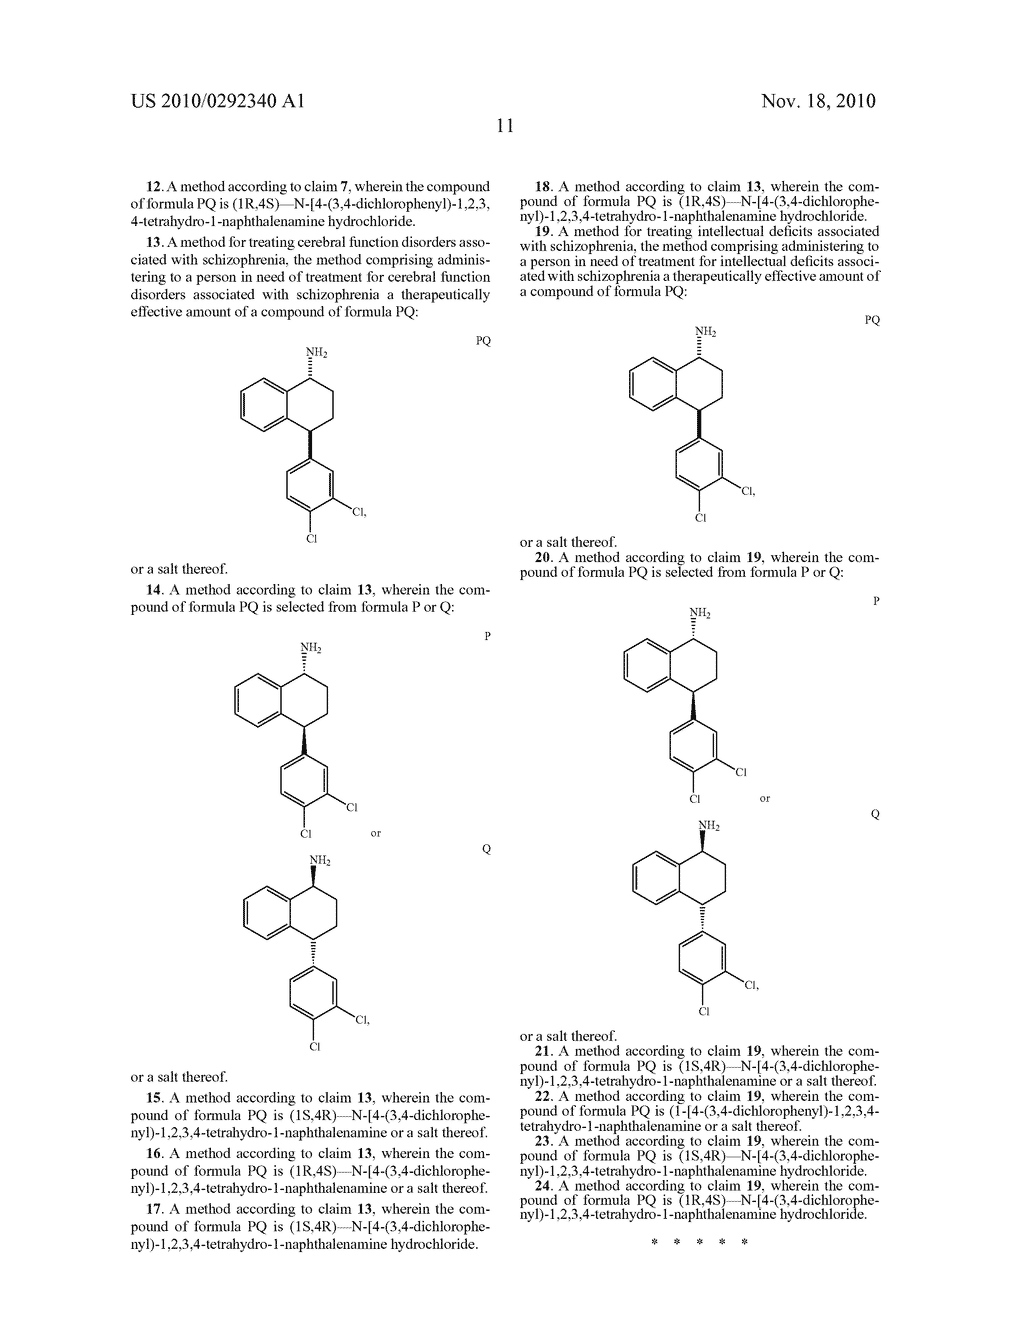 Treatment of CNS Disorders With trans 4-(3,4-Dichlorophenyl)-1,2,3,4-Tetrahydro-1-Napthalenamine - diagram, schematic, and image 12